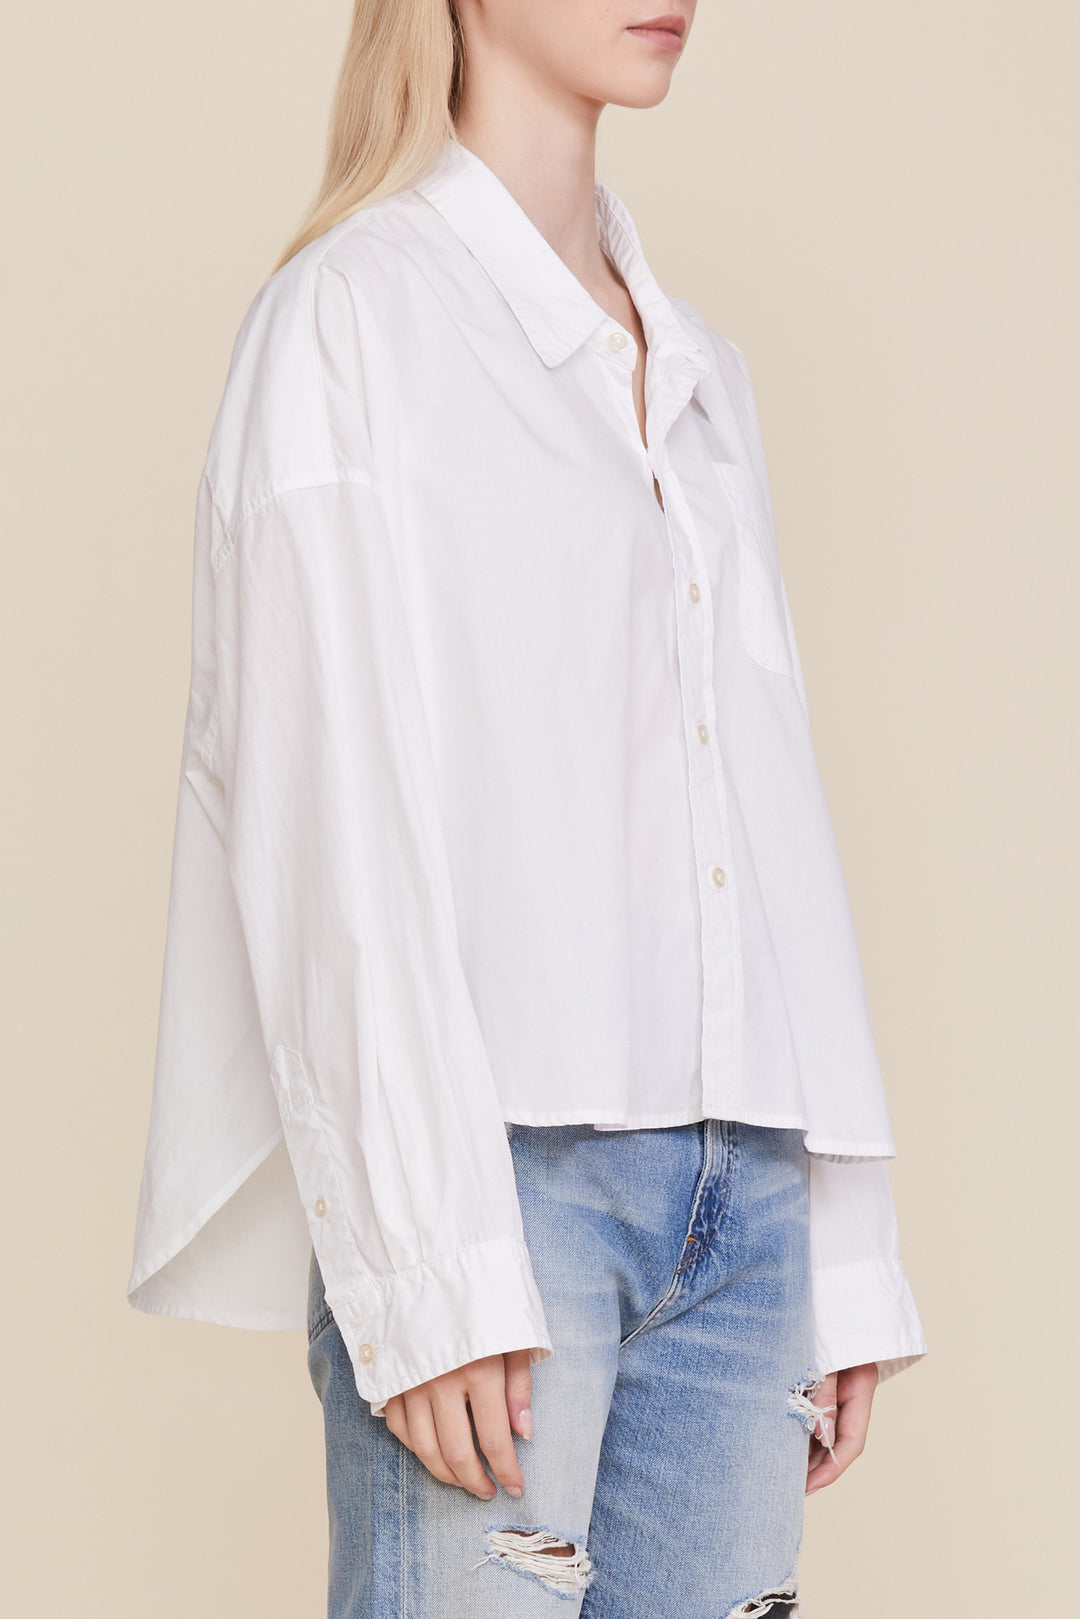 Cropped Button Front Shirt - White